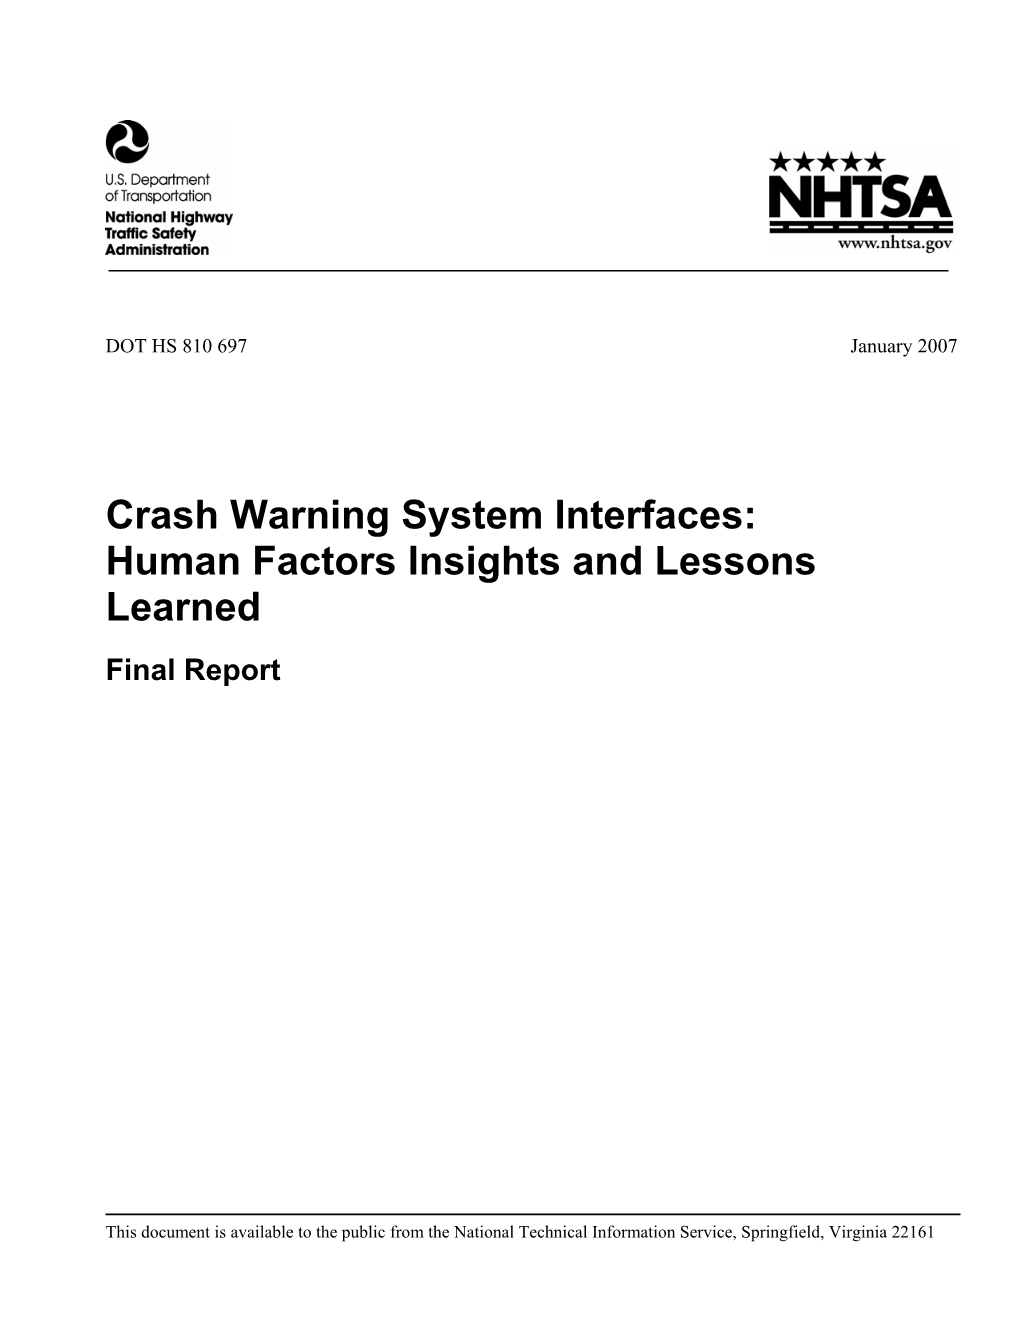 Crash Warning System Interfaces: Human Factors Insights and Lessons Learned